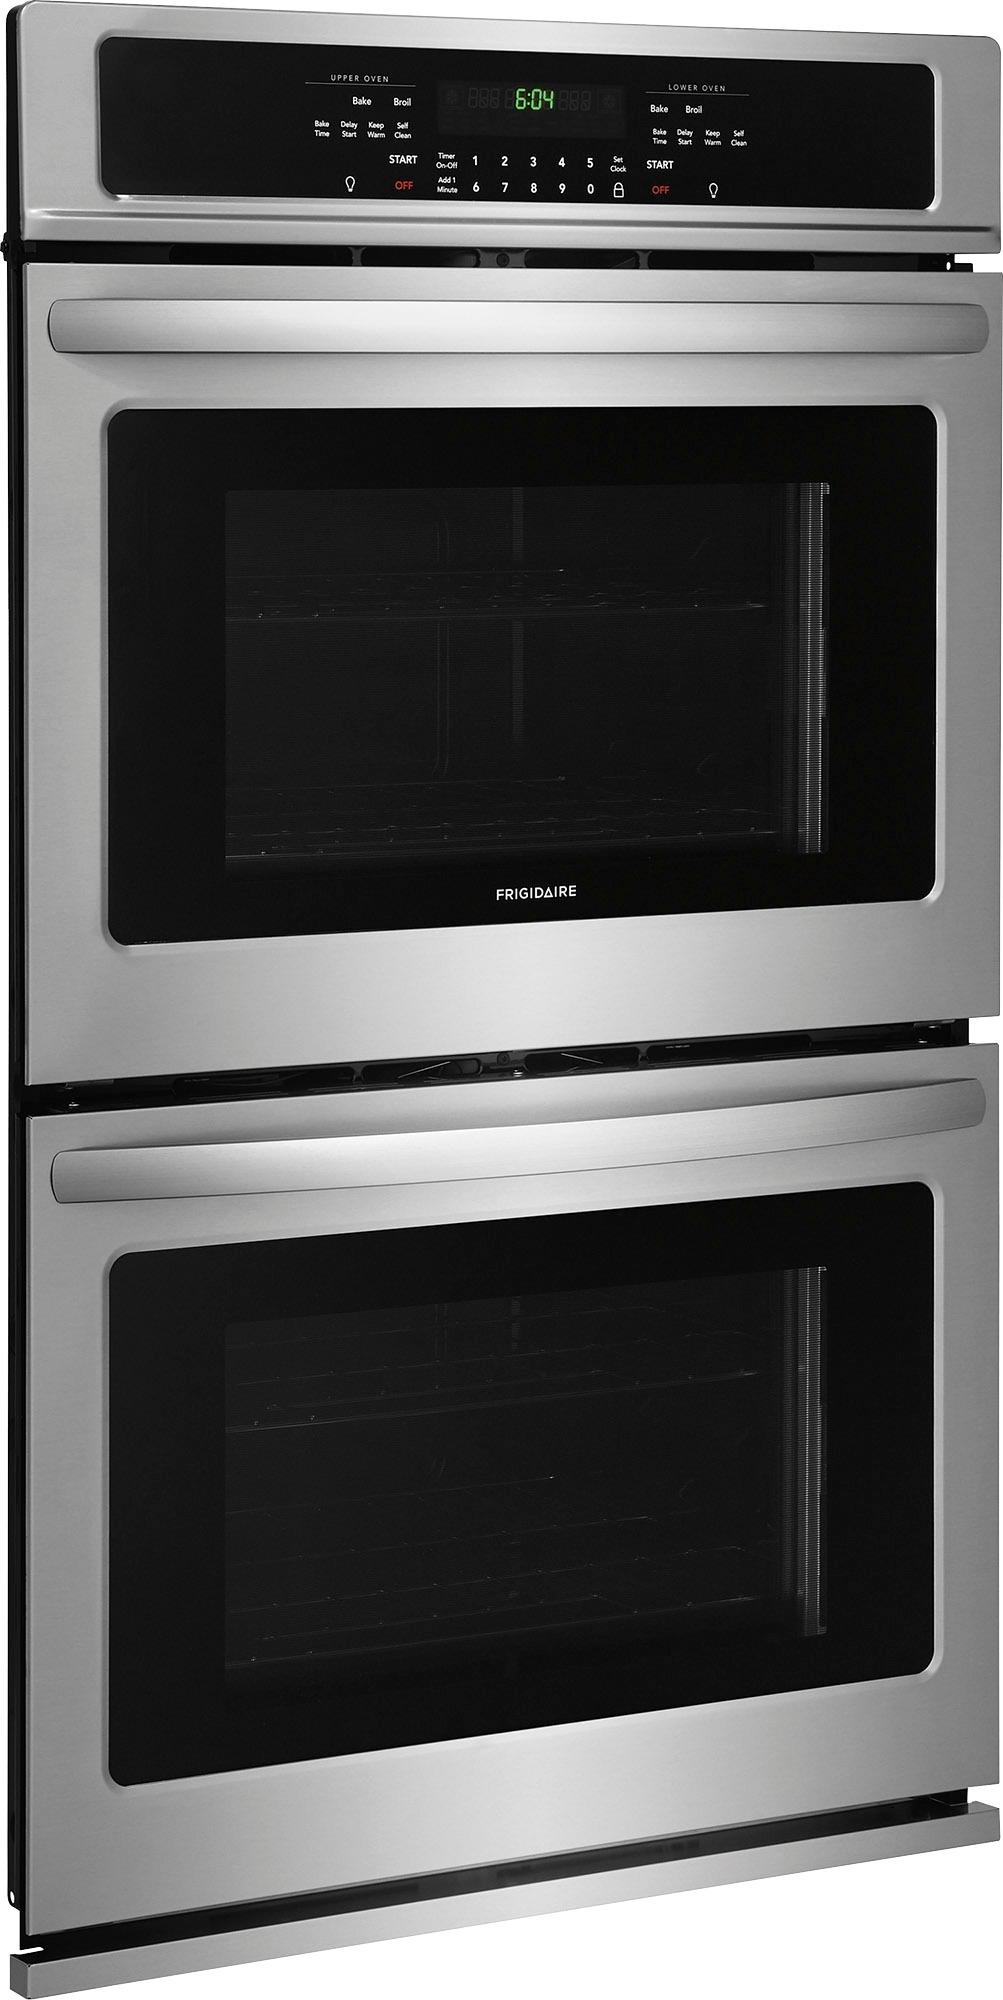 Angle View: Frigidaire - 30" Built-In Double Electric Wall Oven - Stainless steel